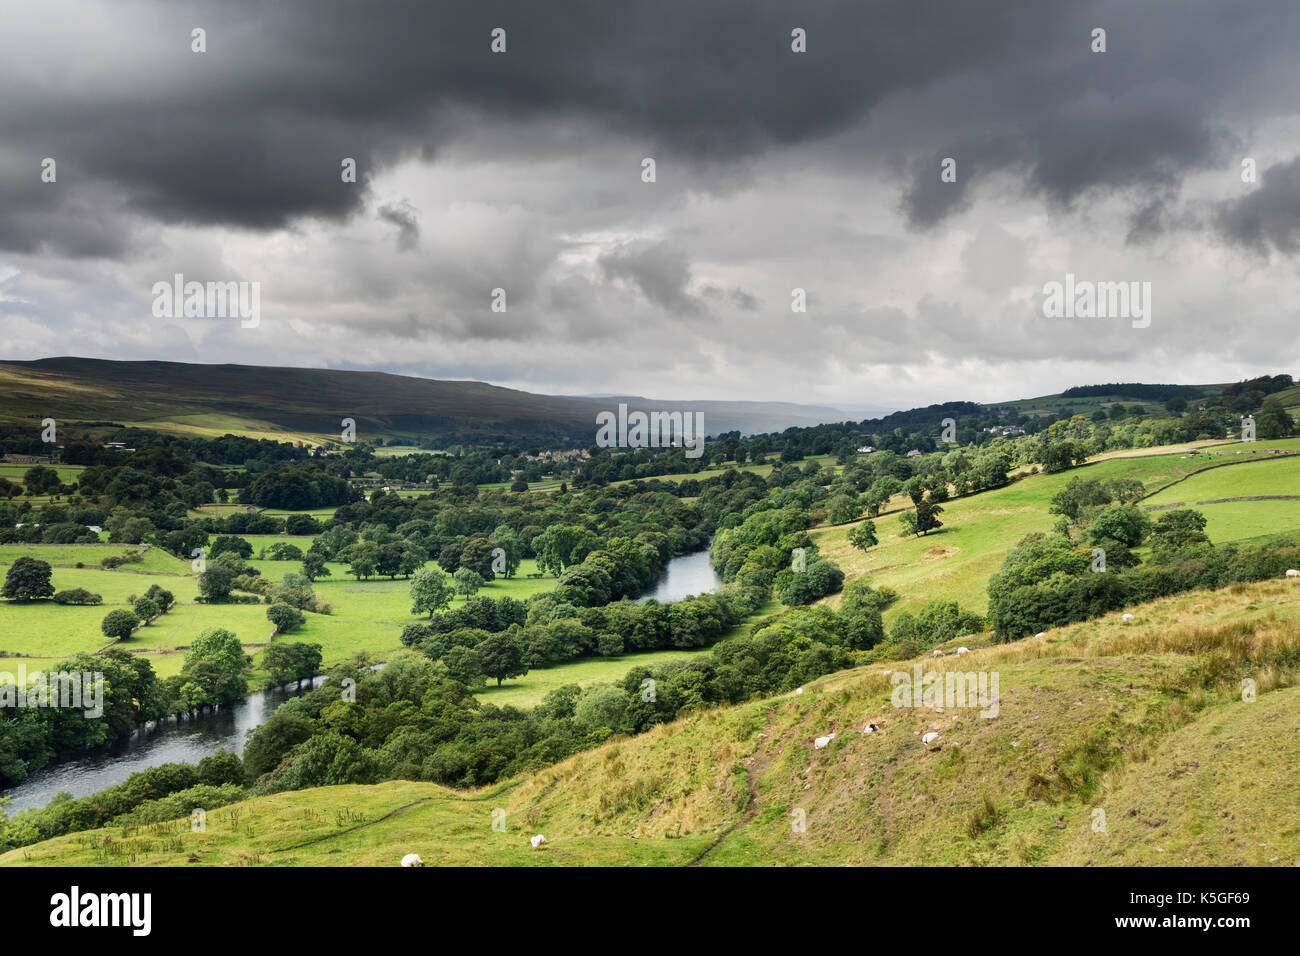 Teesdale, County Durham UK.  Saturday 9th September 2017. UK Weather.  It has been a day of sunny spells and scattered heavy showers across the Northeast of England.  These showers are expected to die away for a time before the rain returns on Sunday afternoon. Credit: David Forster/Alamy Live News. Stock Photo